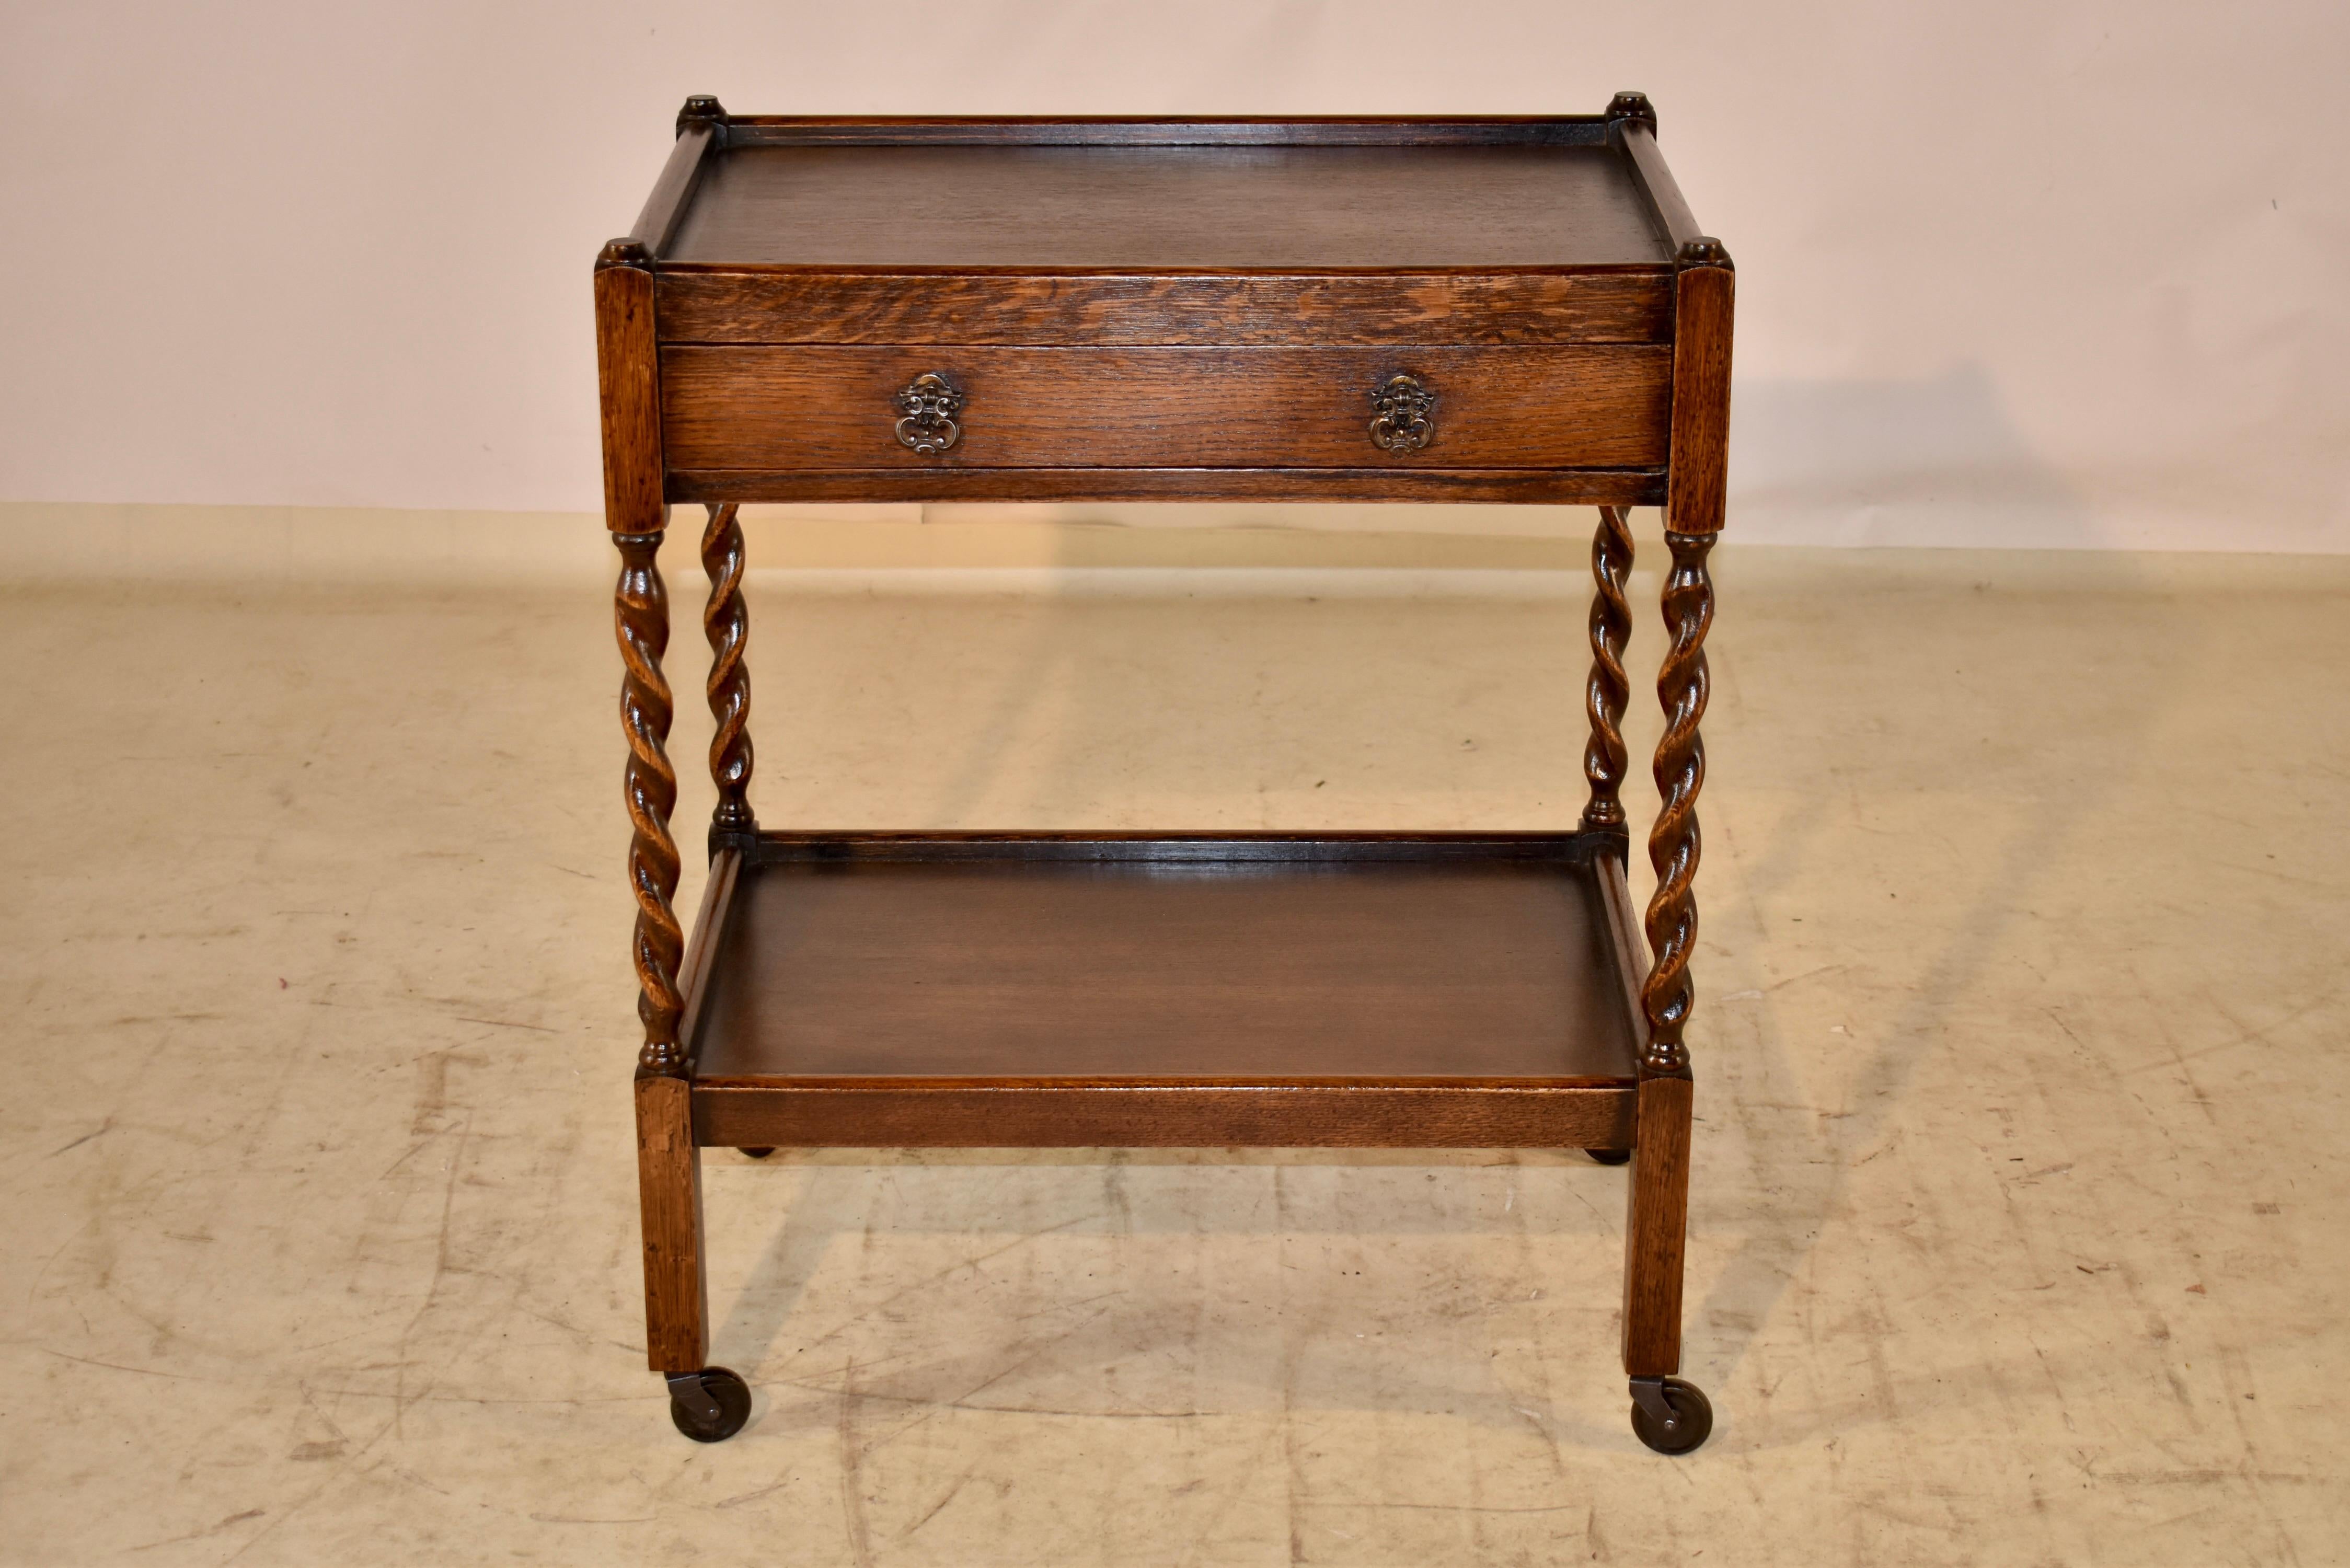 Period Edwardian oak bar cart from England. The cart features a top shelf which has a gallery surrounding the edges and follows down to a simple apron, and has a single drawer. The piece is supported on hand turned barley twist legs, joined by a